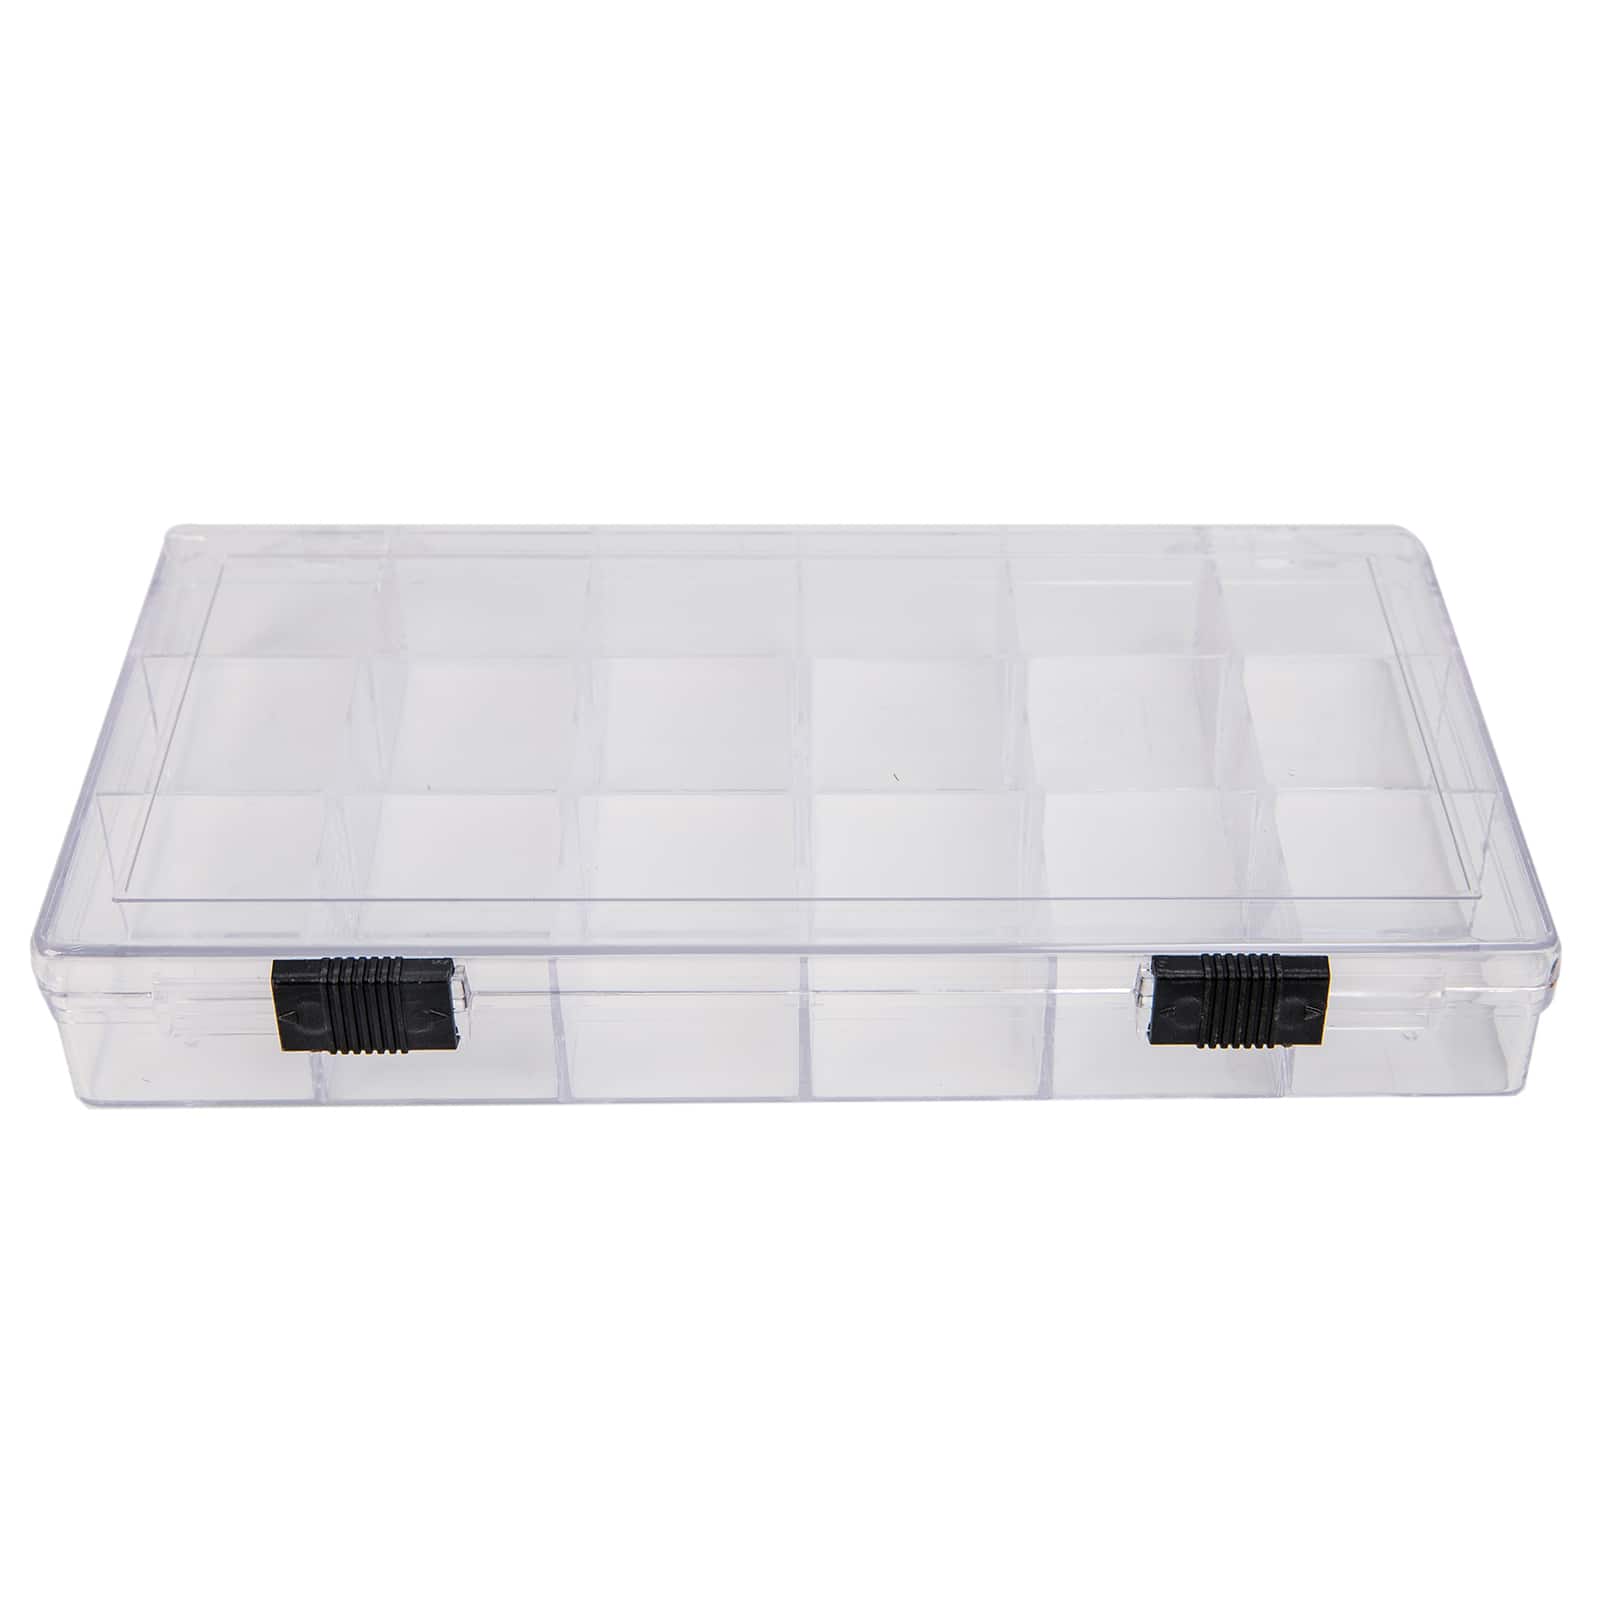 The Beadery 18 Compartment Bead Box-Tie Dye